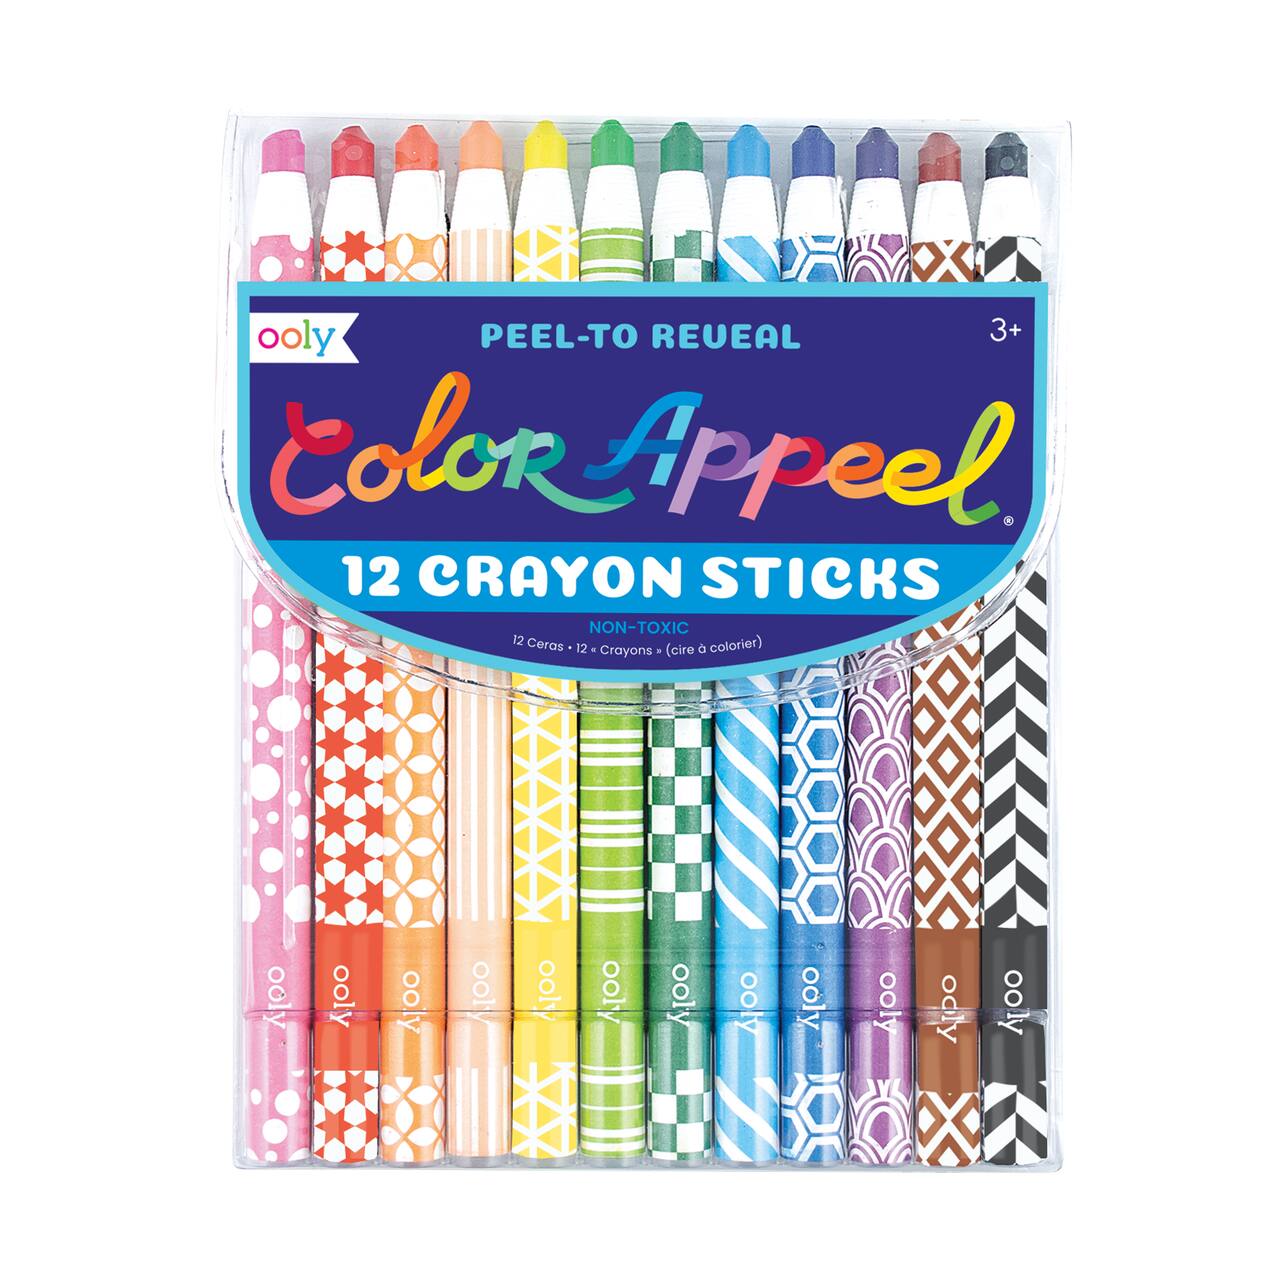 OOLY Color Appeel&#xAE; Peel to Reveal Crayon Sticks, 12ct.